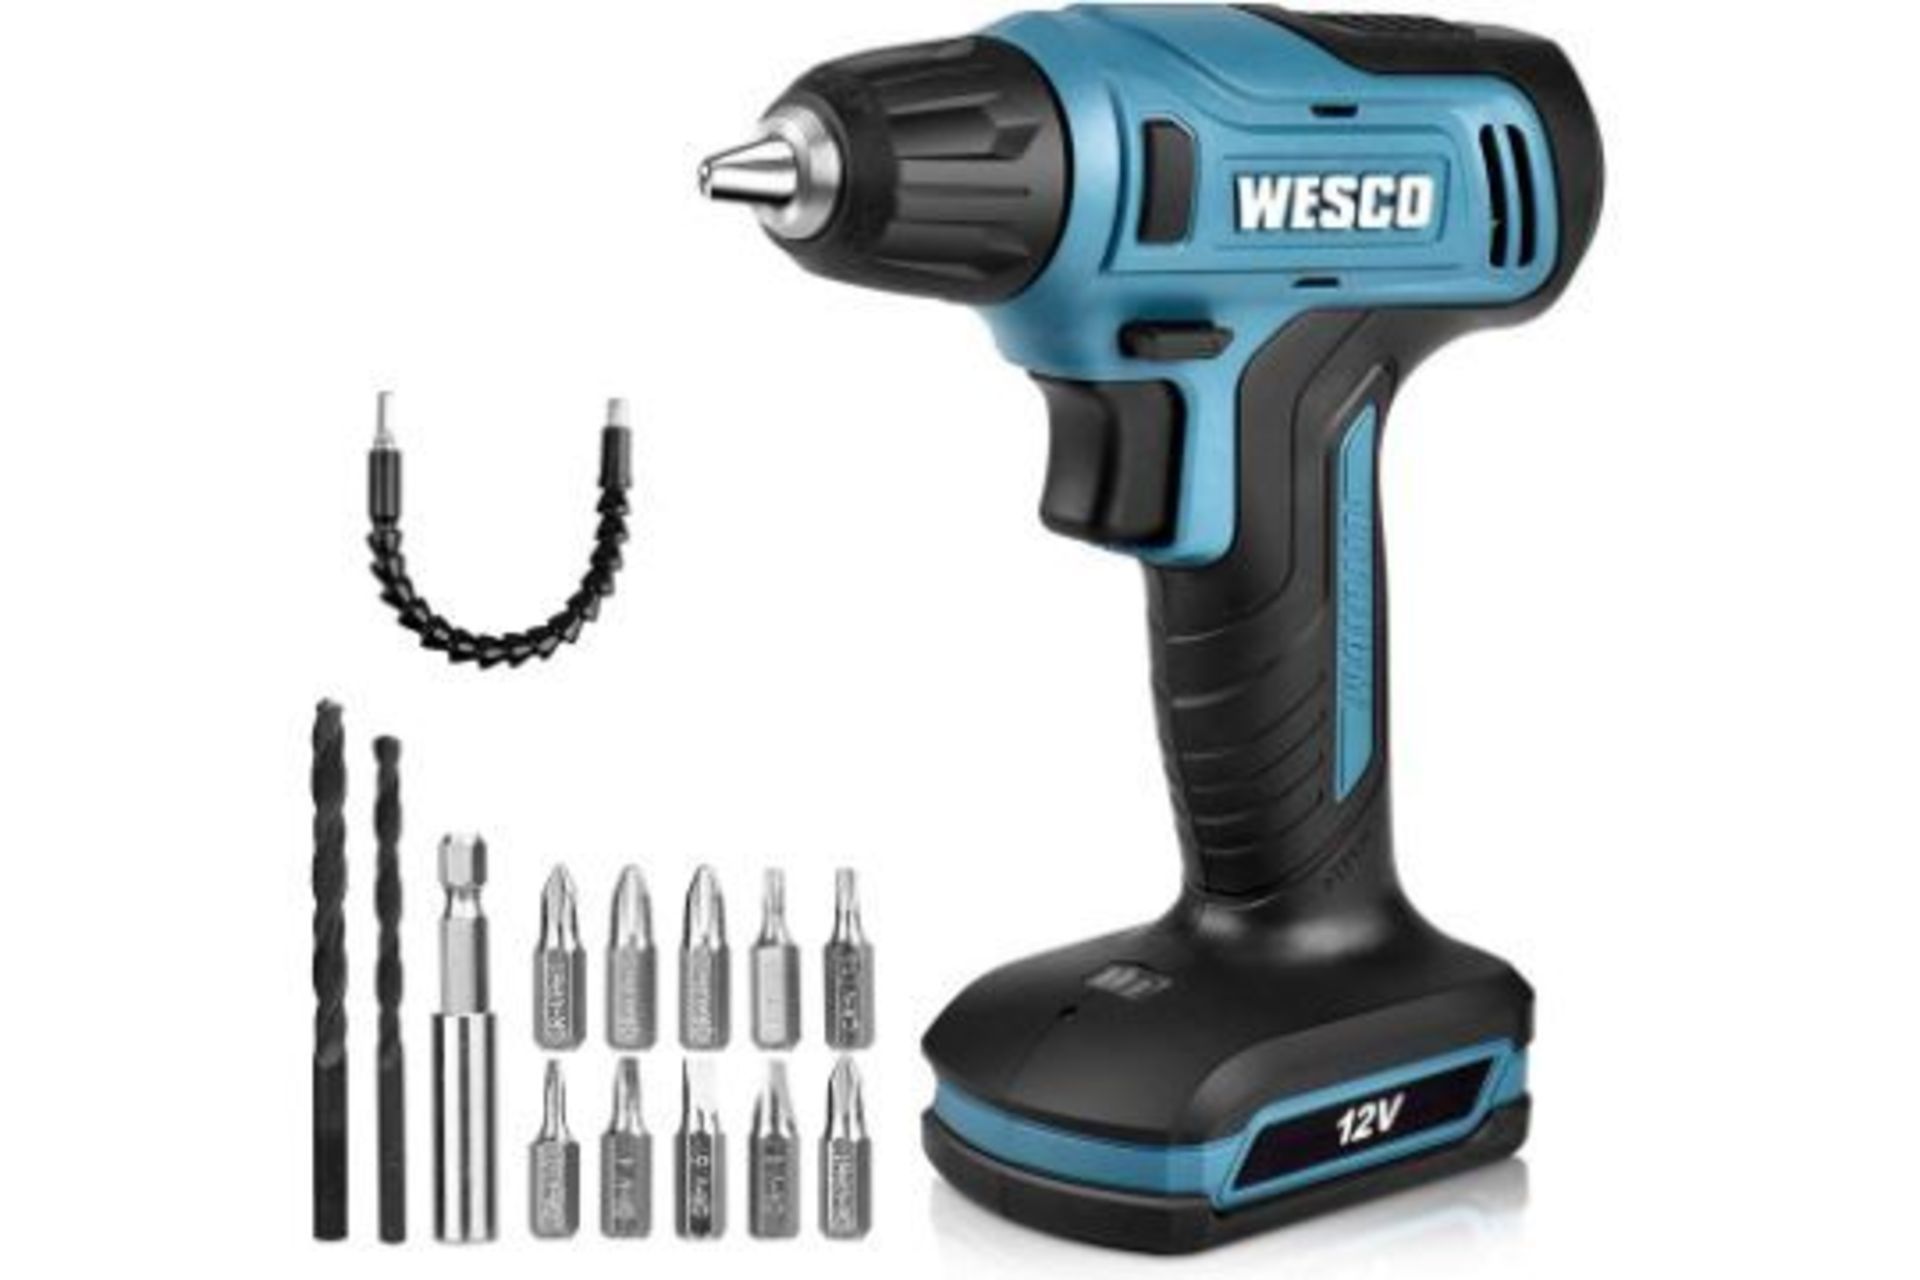 TRADE LOT 10 x New Boxed WESCO Cordless Drill and Screwdriver Set, 12V Electric Screwdriver, 12